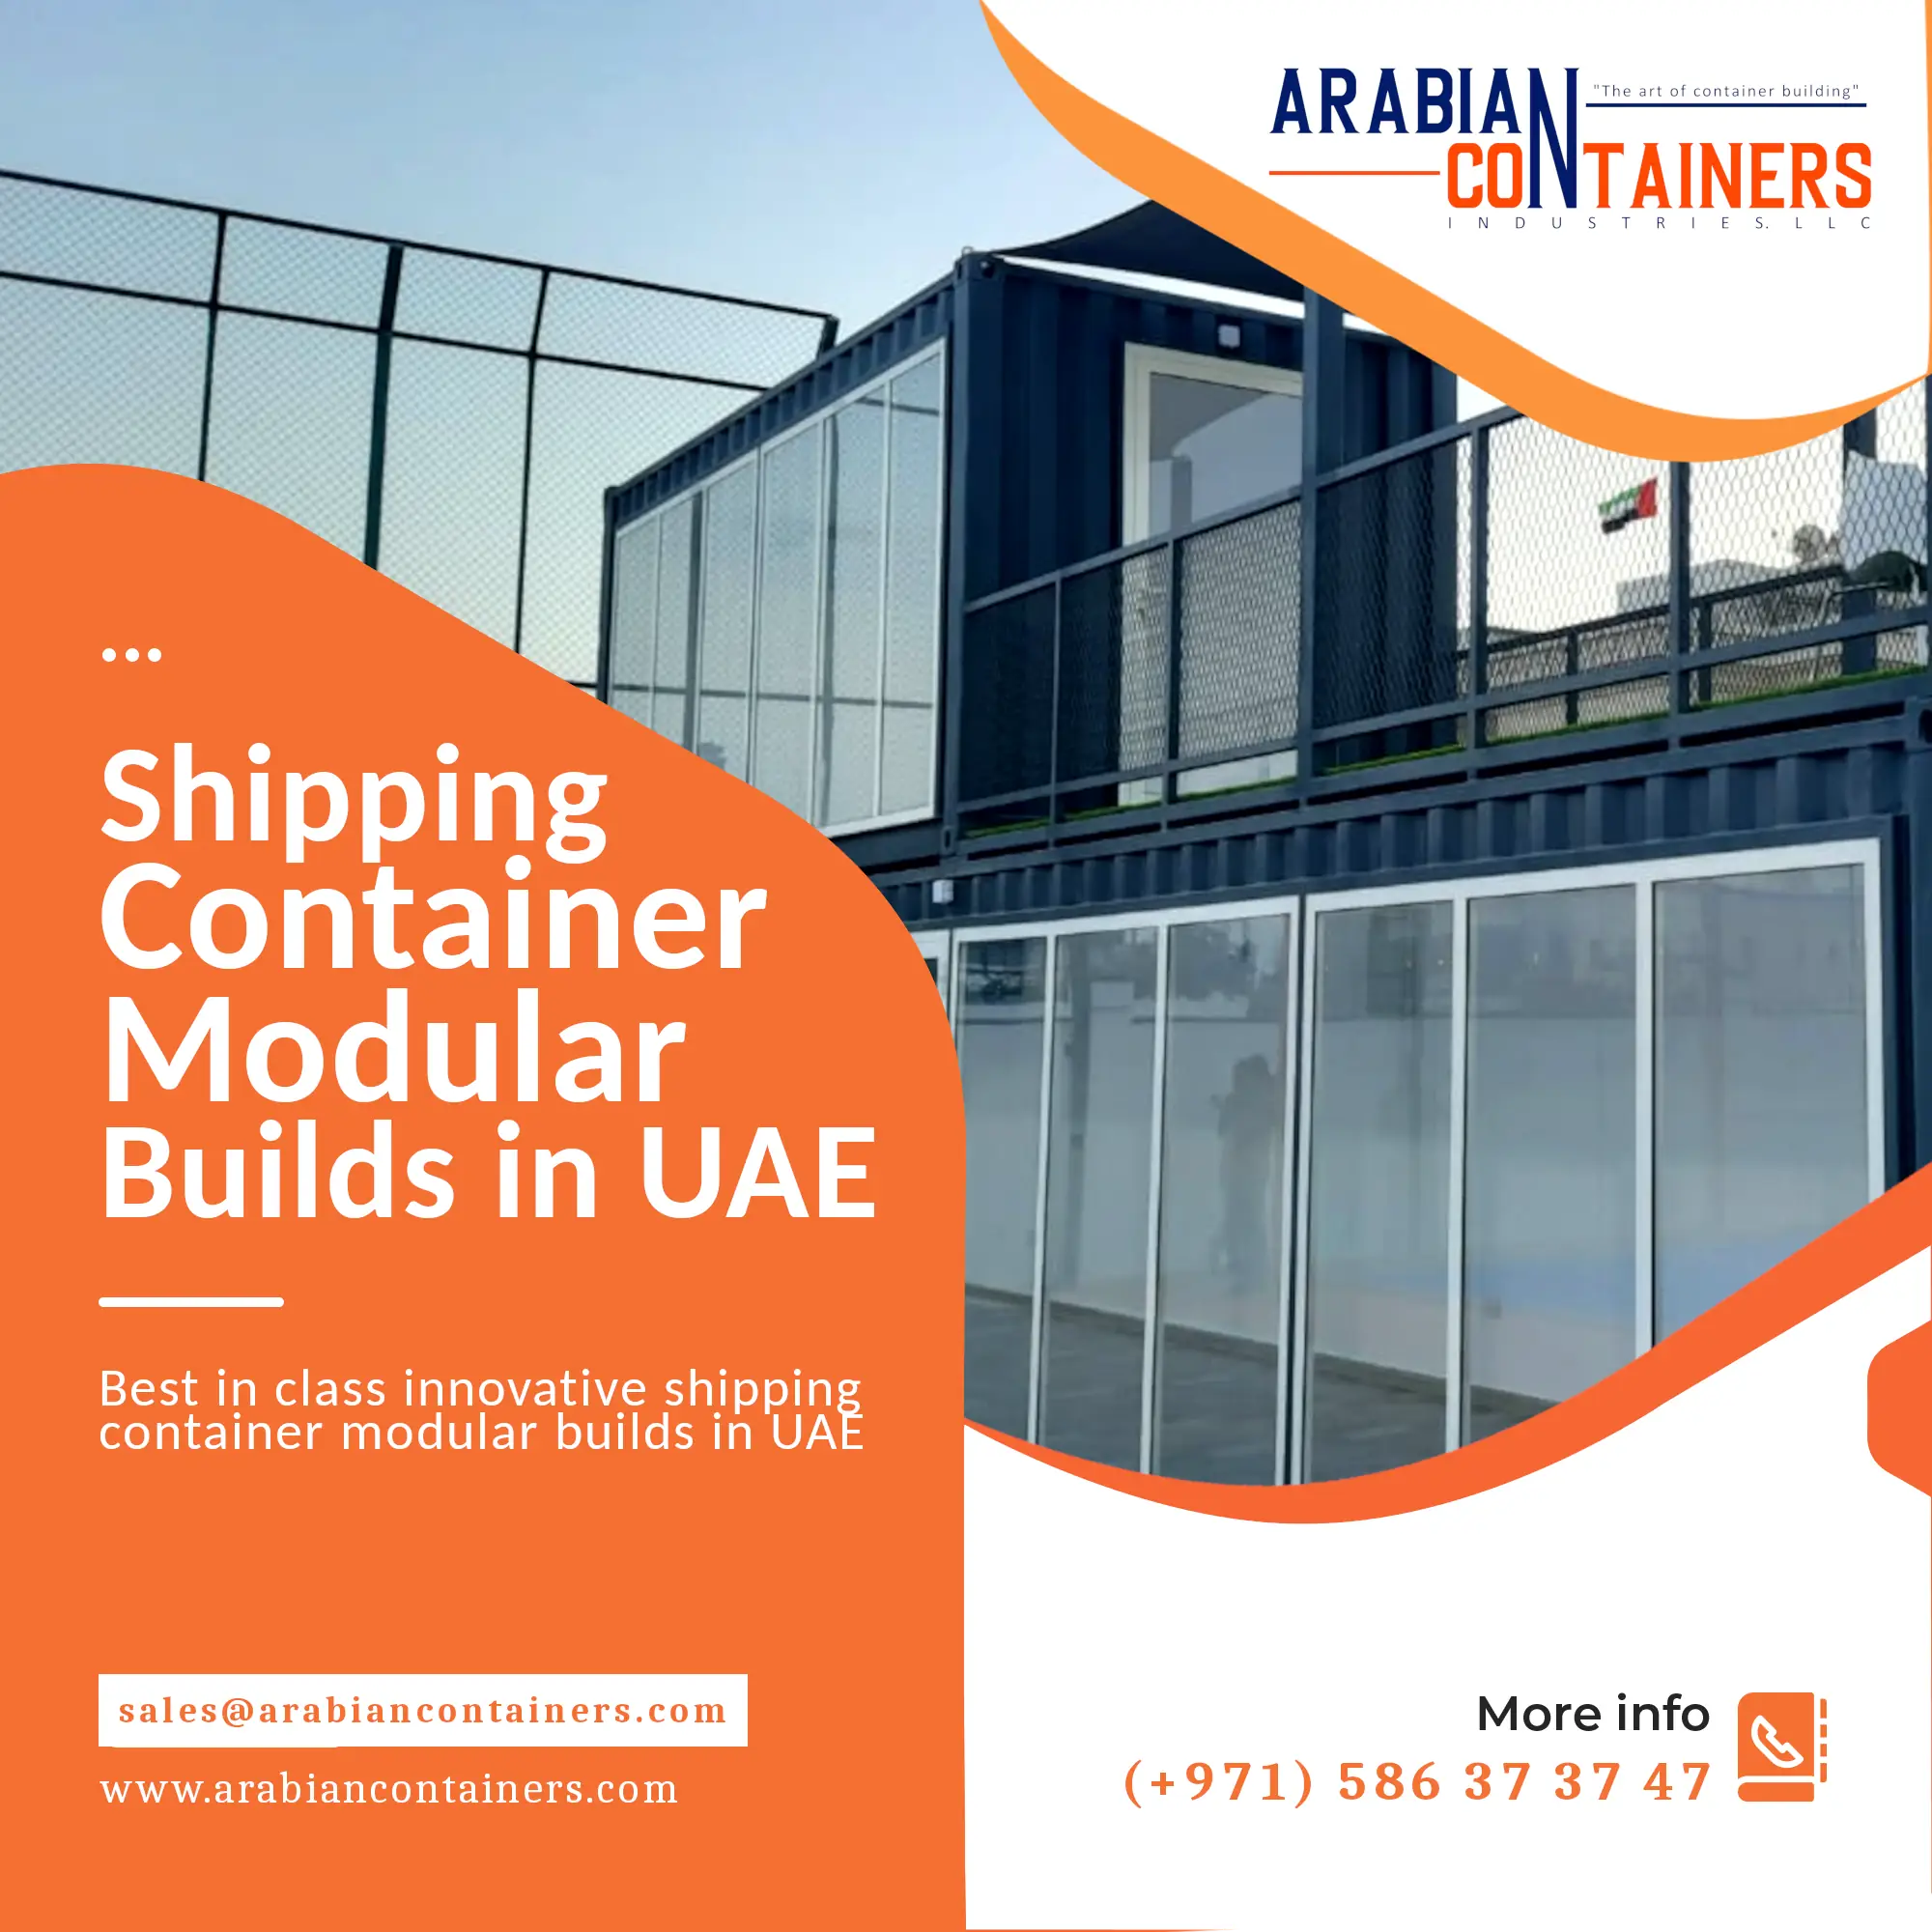 Modular Building Solutions: The Future of Construction Technology in UAE